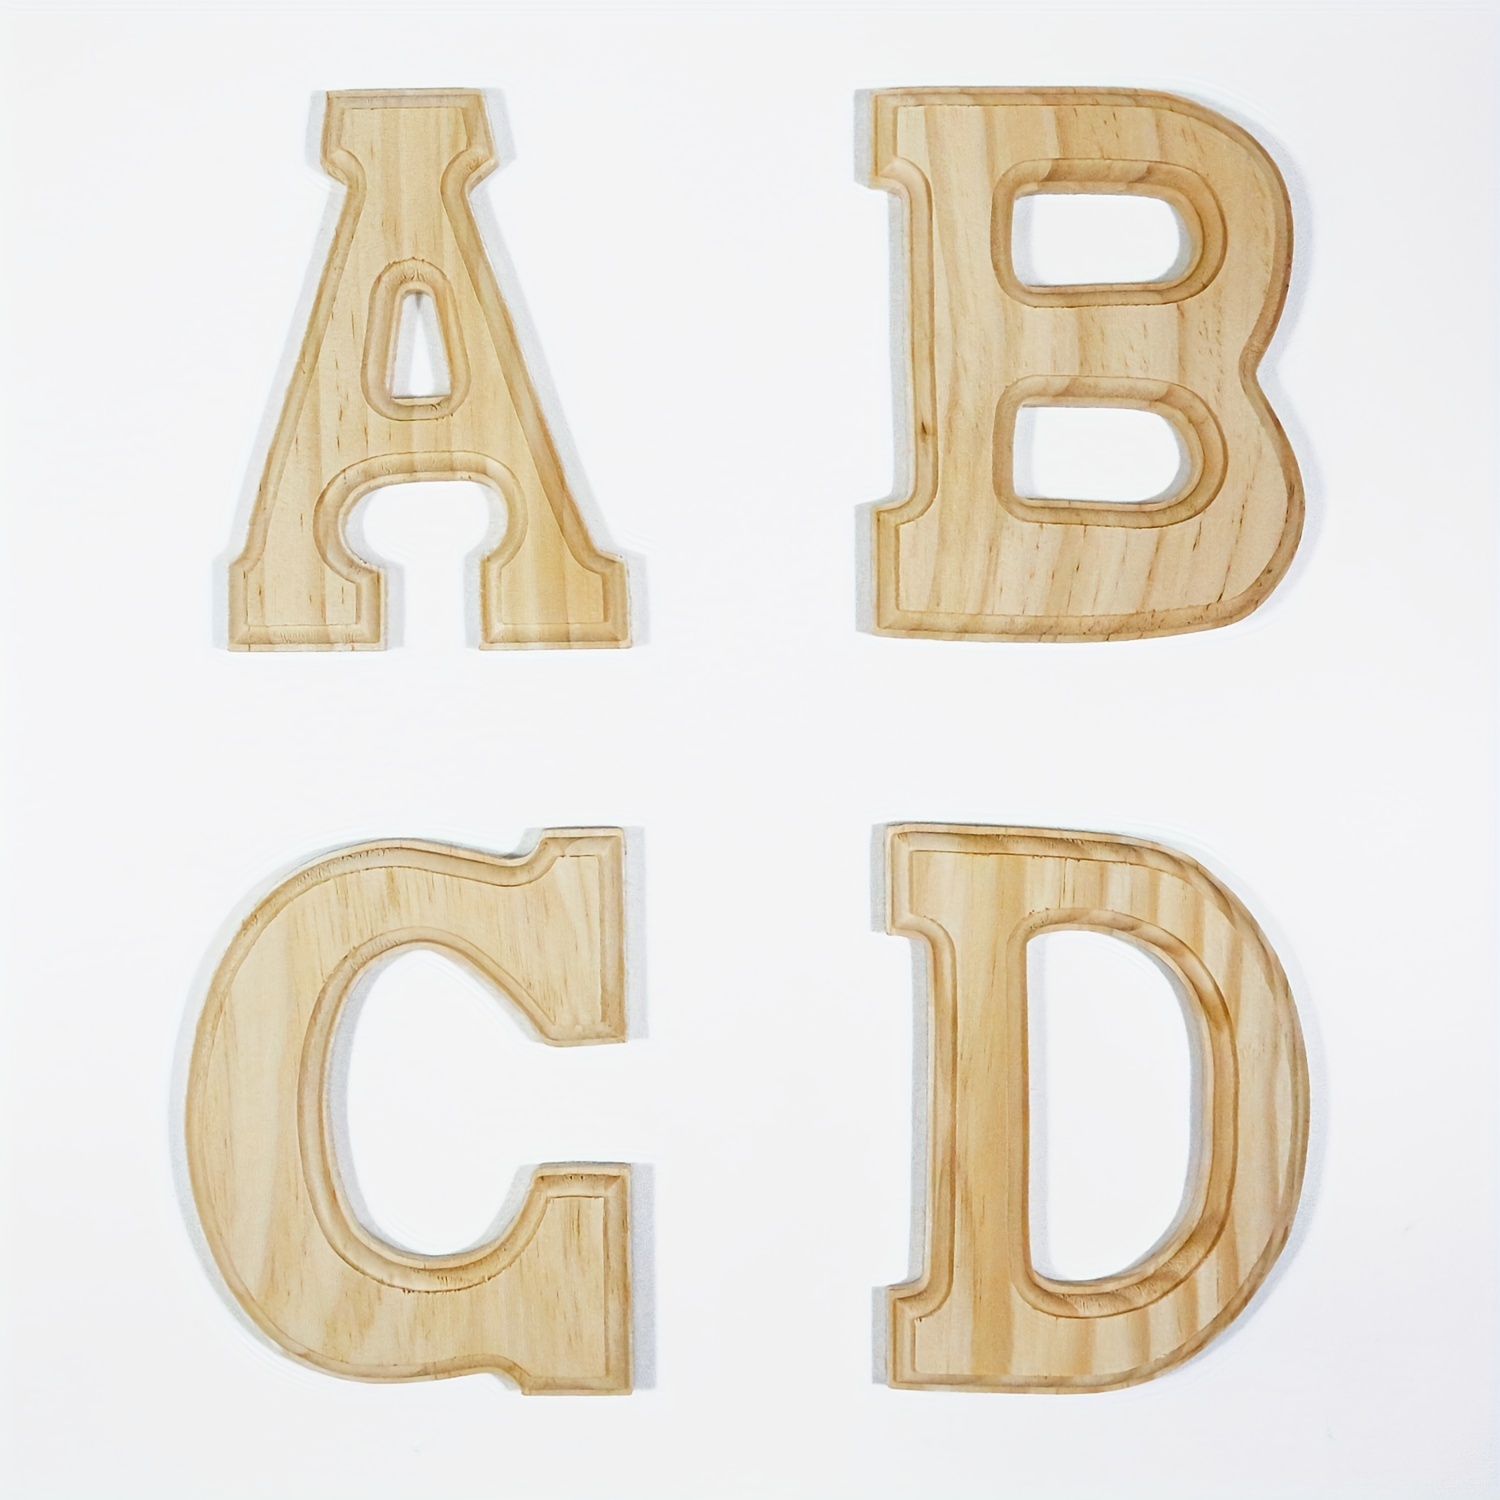 6 Inch White Wood Letters Unfinished Wood Letters for Wall Decor